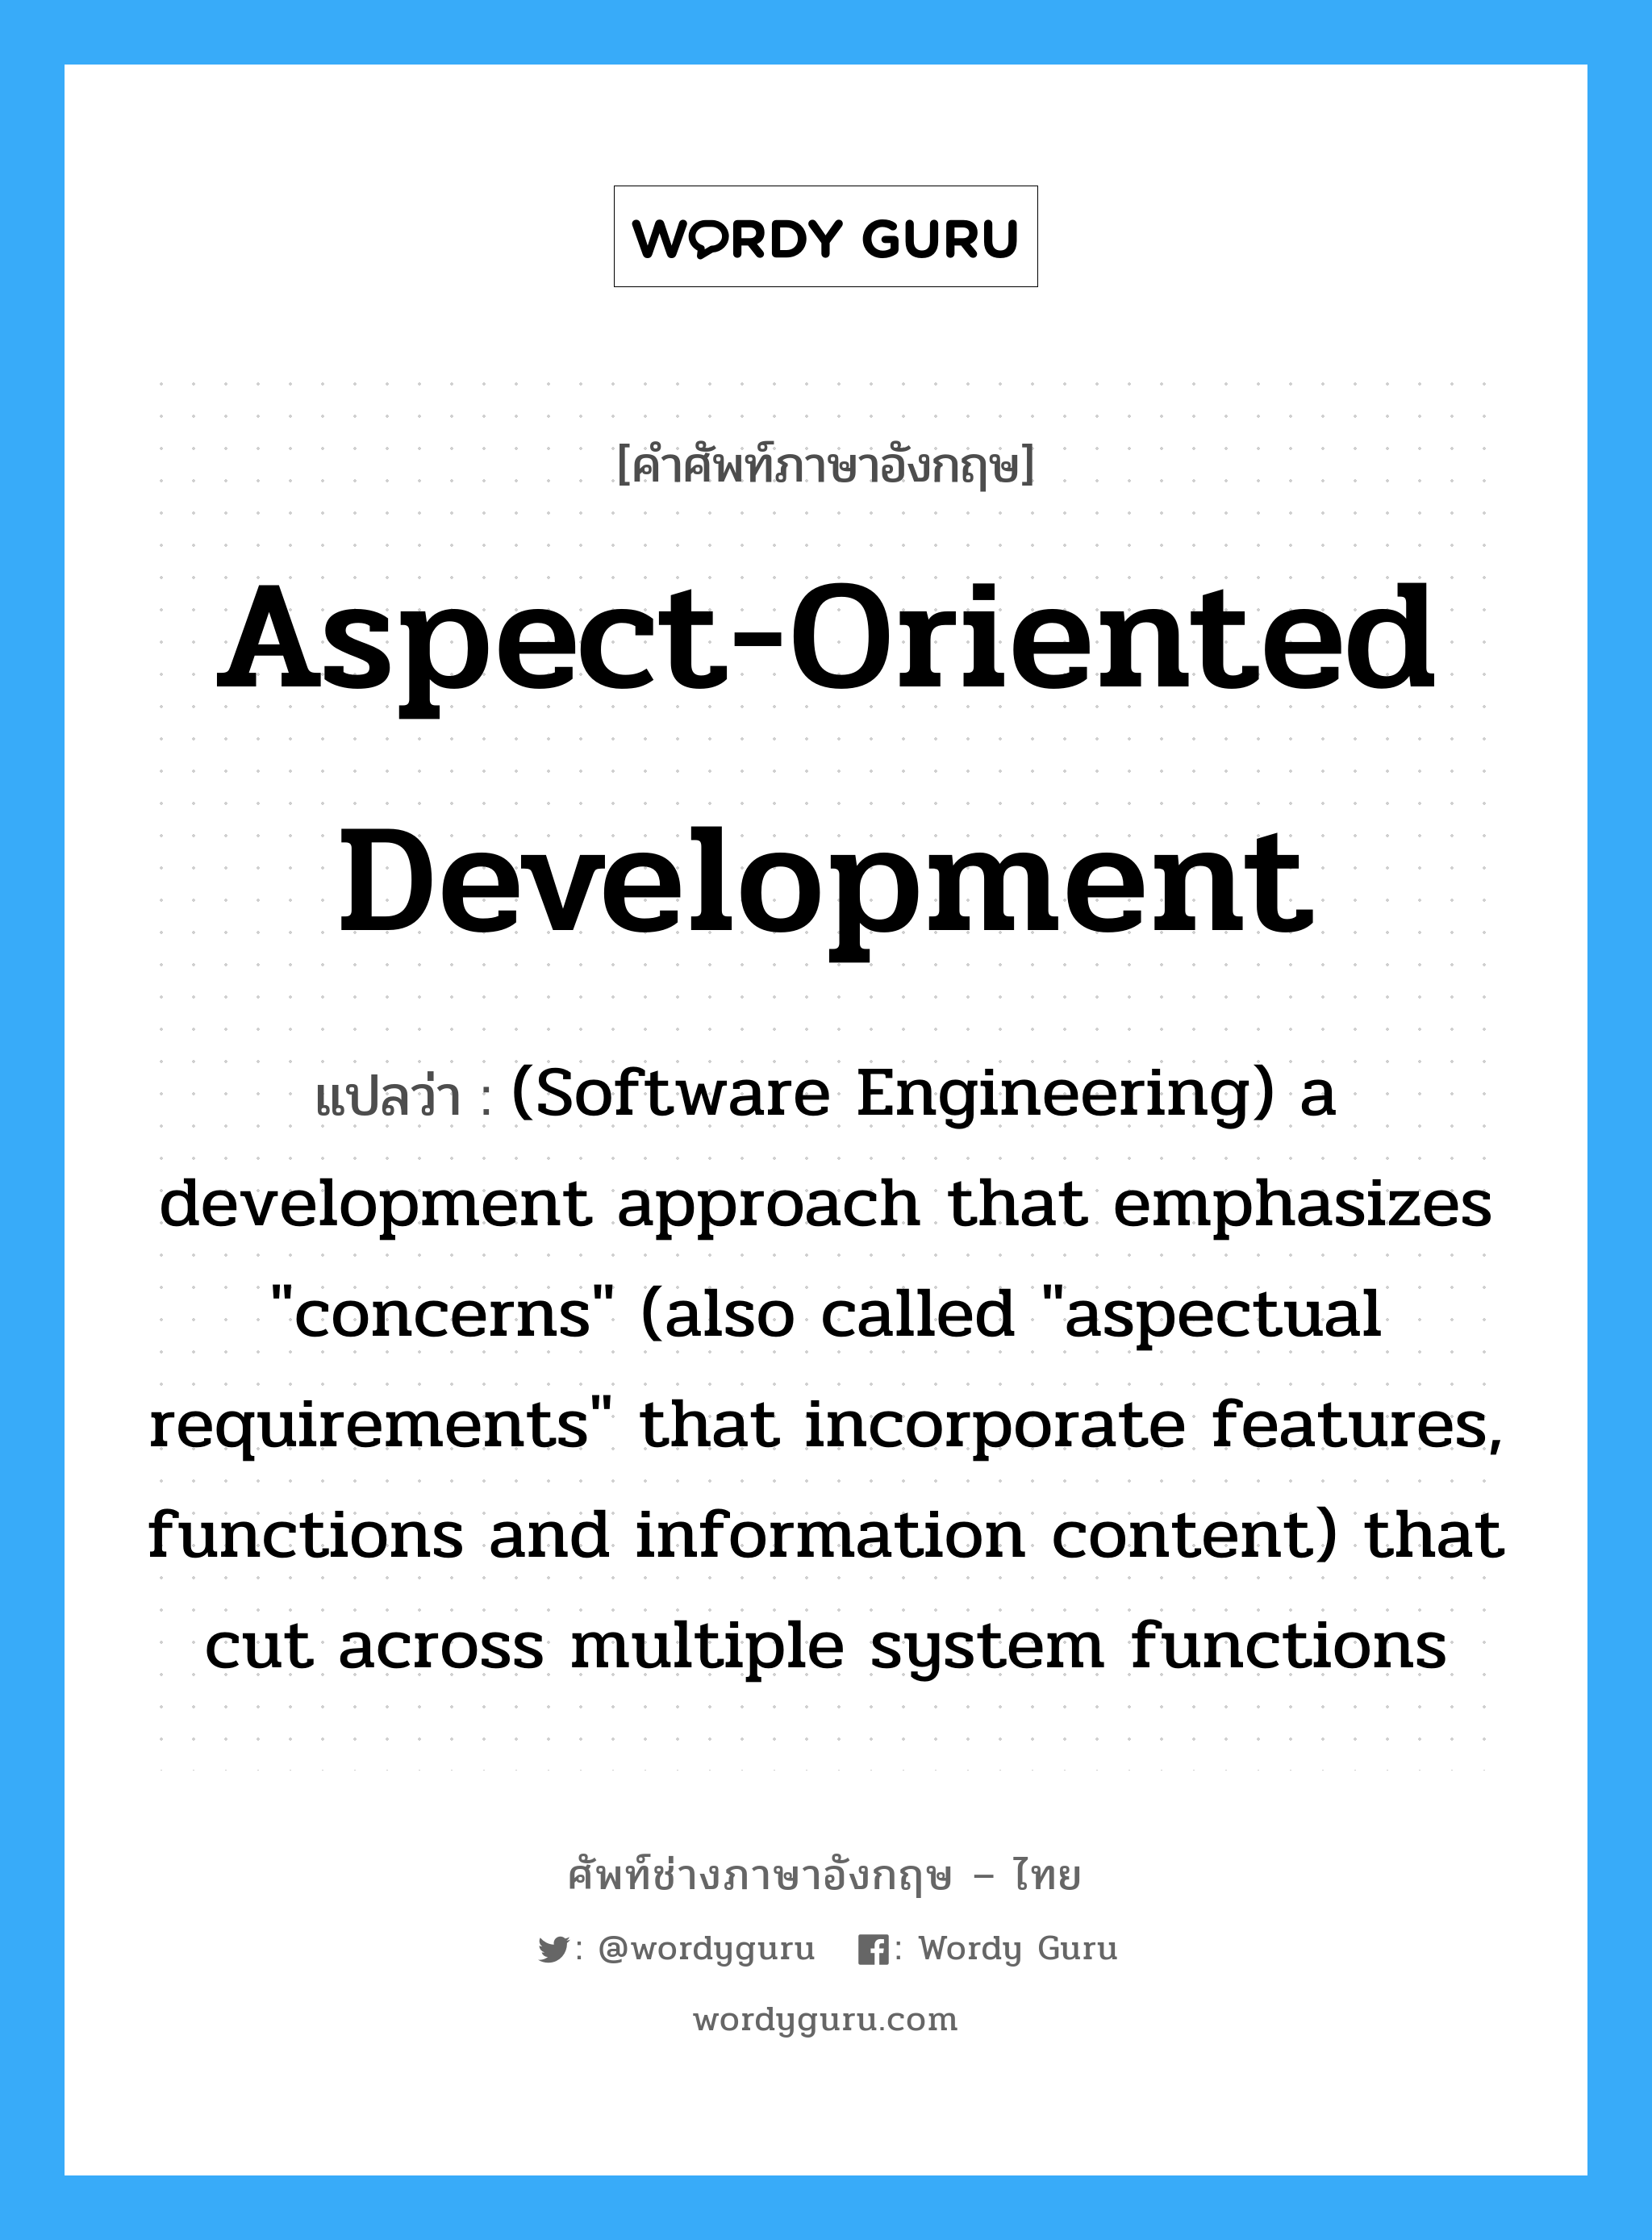 (Software Engineering) a development approach that emphasizes "concerns" (also called "aspectual requirements" that incorporate features, functions and information content) that cut across multiple system functions ภาษาอังกฤษ?, คำศัพท์ช่างภาษาอังกฤษ - ไทย (Software Engineering) a development approach that emphasizes "concerns" (also called "aspectual requirements" that incorporate features, functions and information content) that cut across multiple system functions คำศัพท์ภาษาอังกฤษ (Software Engineering) a development approach that emphasizes "concerns" (also called "aspectual requirements" that incorporate features, functions and information content) that cut across multiple system functions แปลว่า Aspect-oriented development